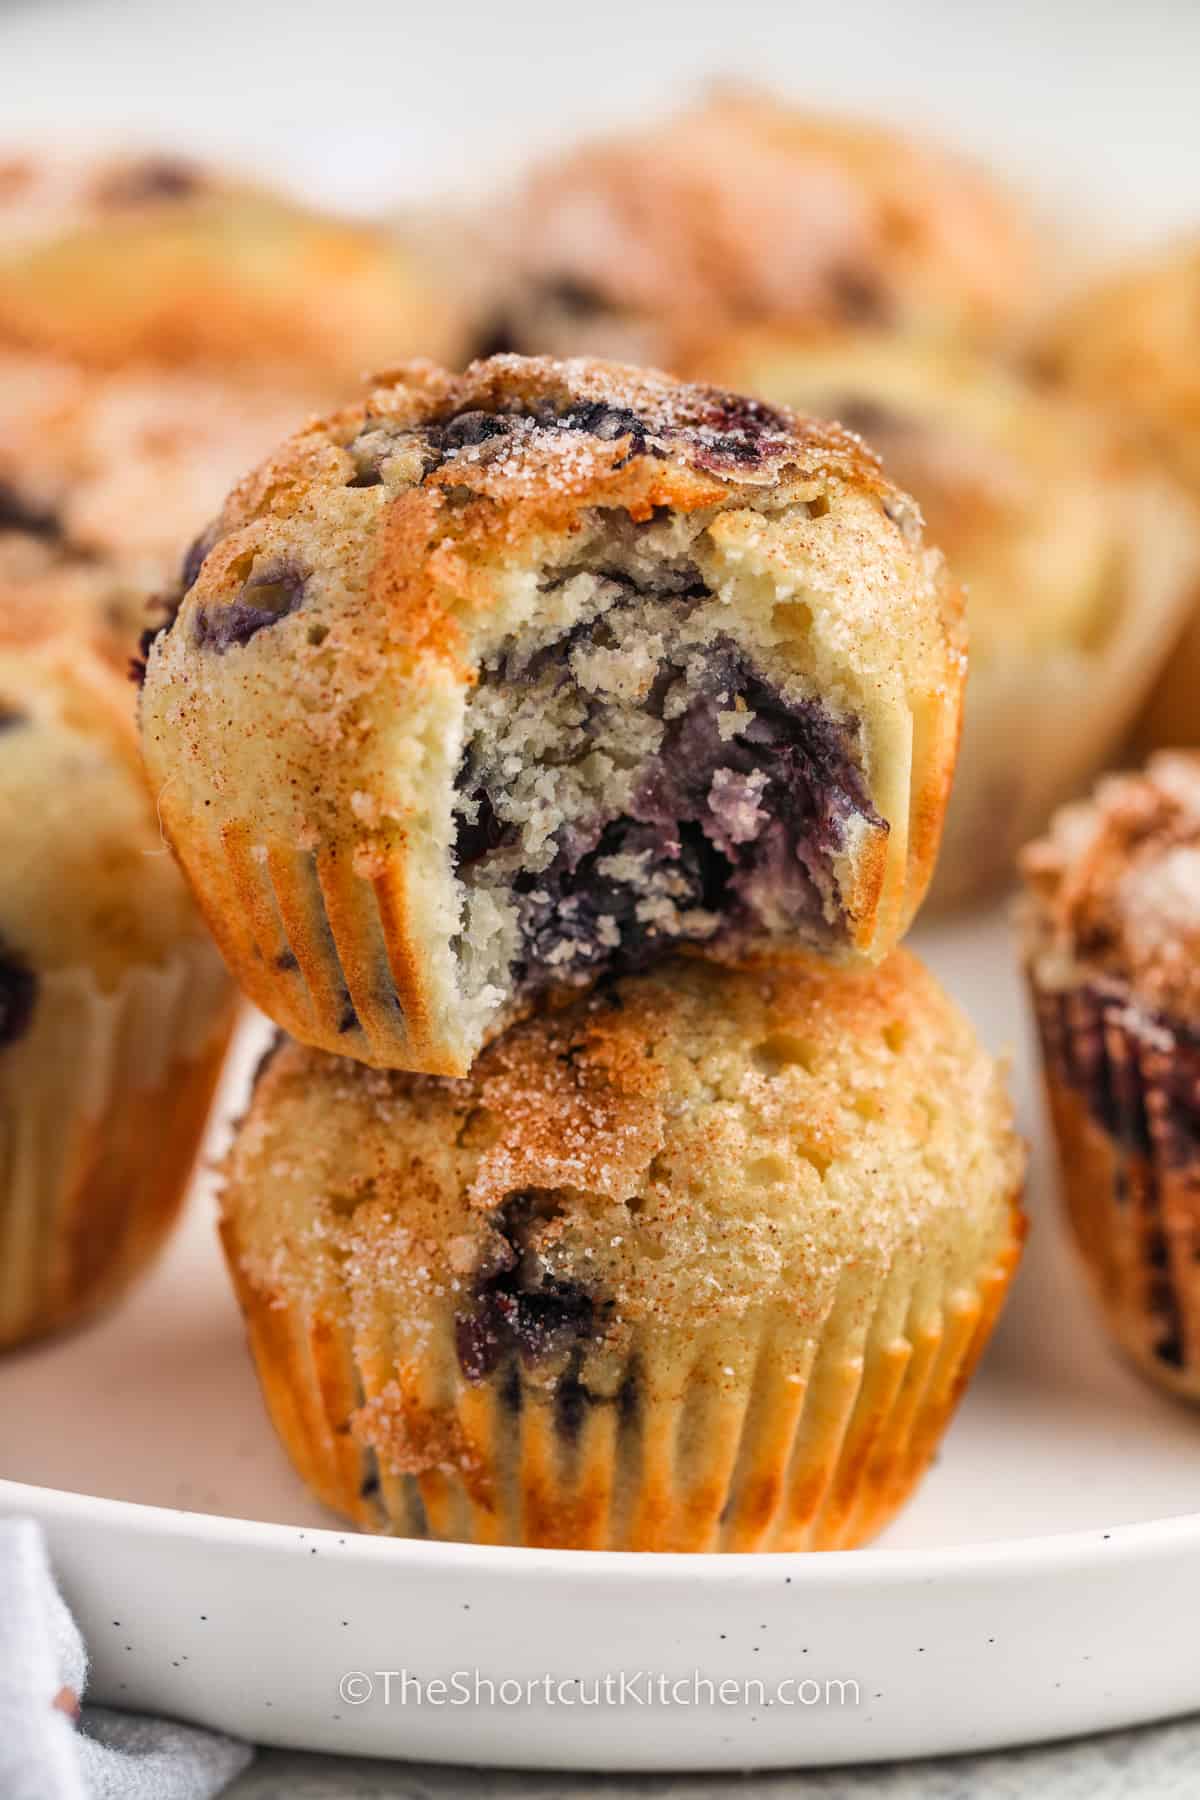 Easy Blueberry Muffins with a bite taken out of one